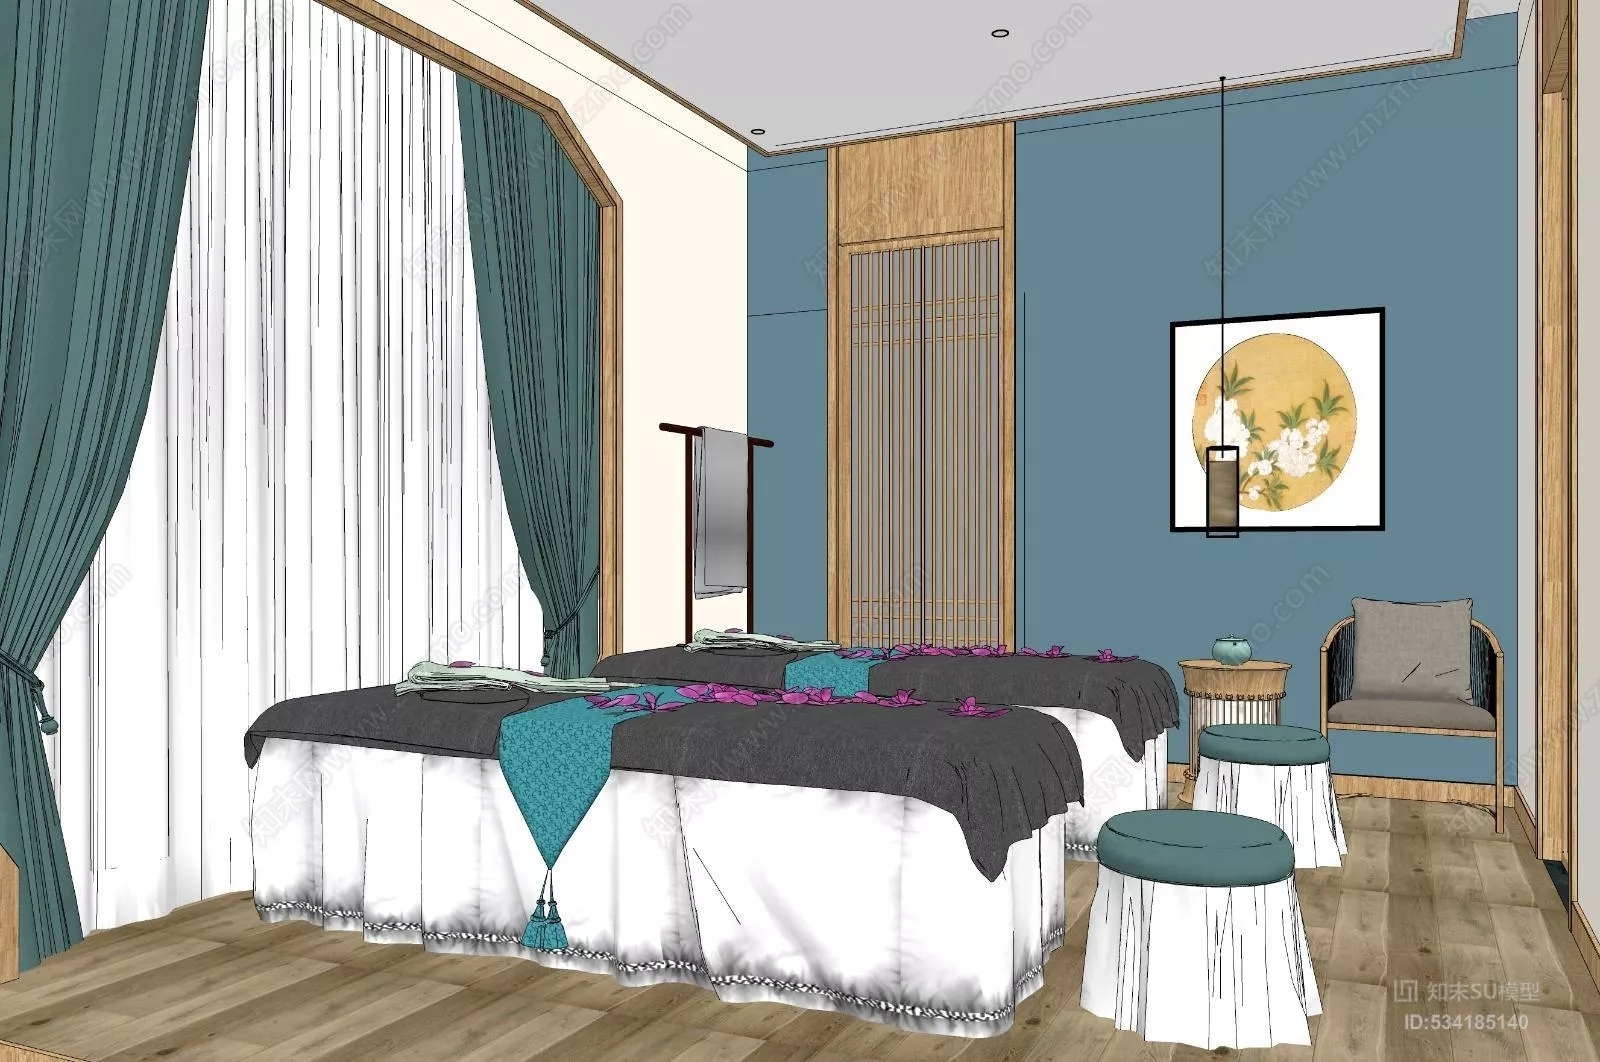 MODERN SPA AND BEAUTY - SKETCHUP 3D SCENE - VRAY OR ENSCAPE - ID13884